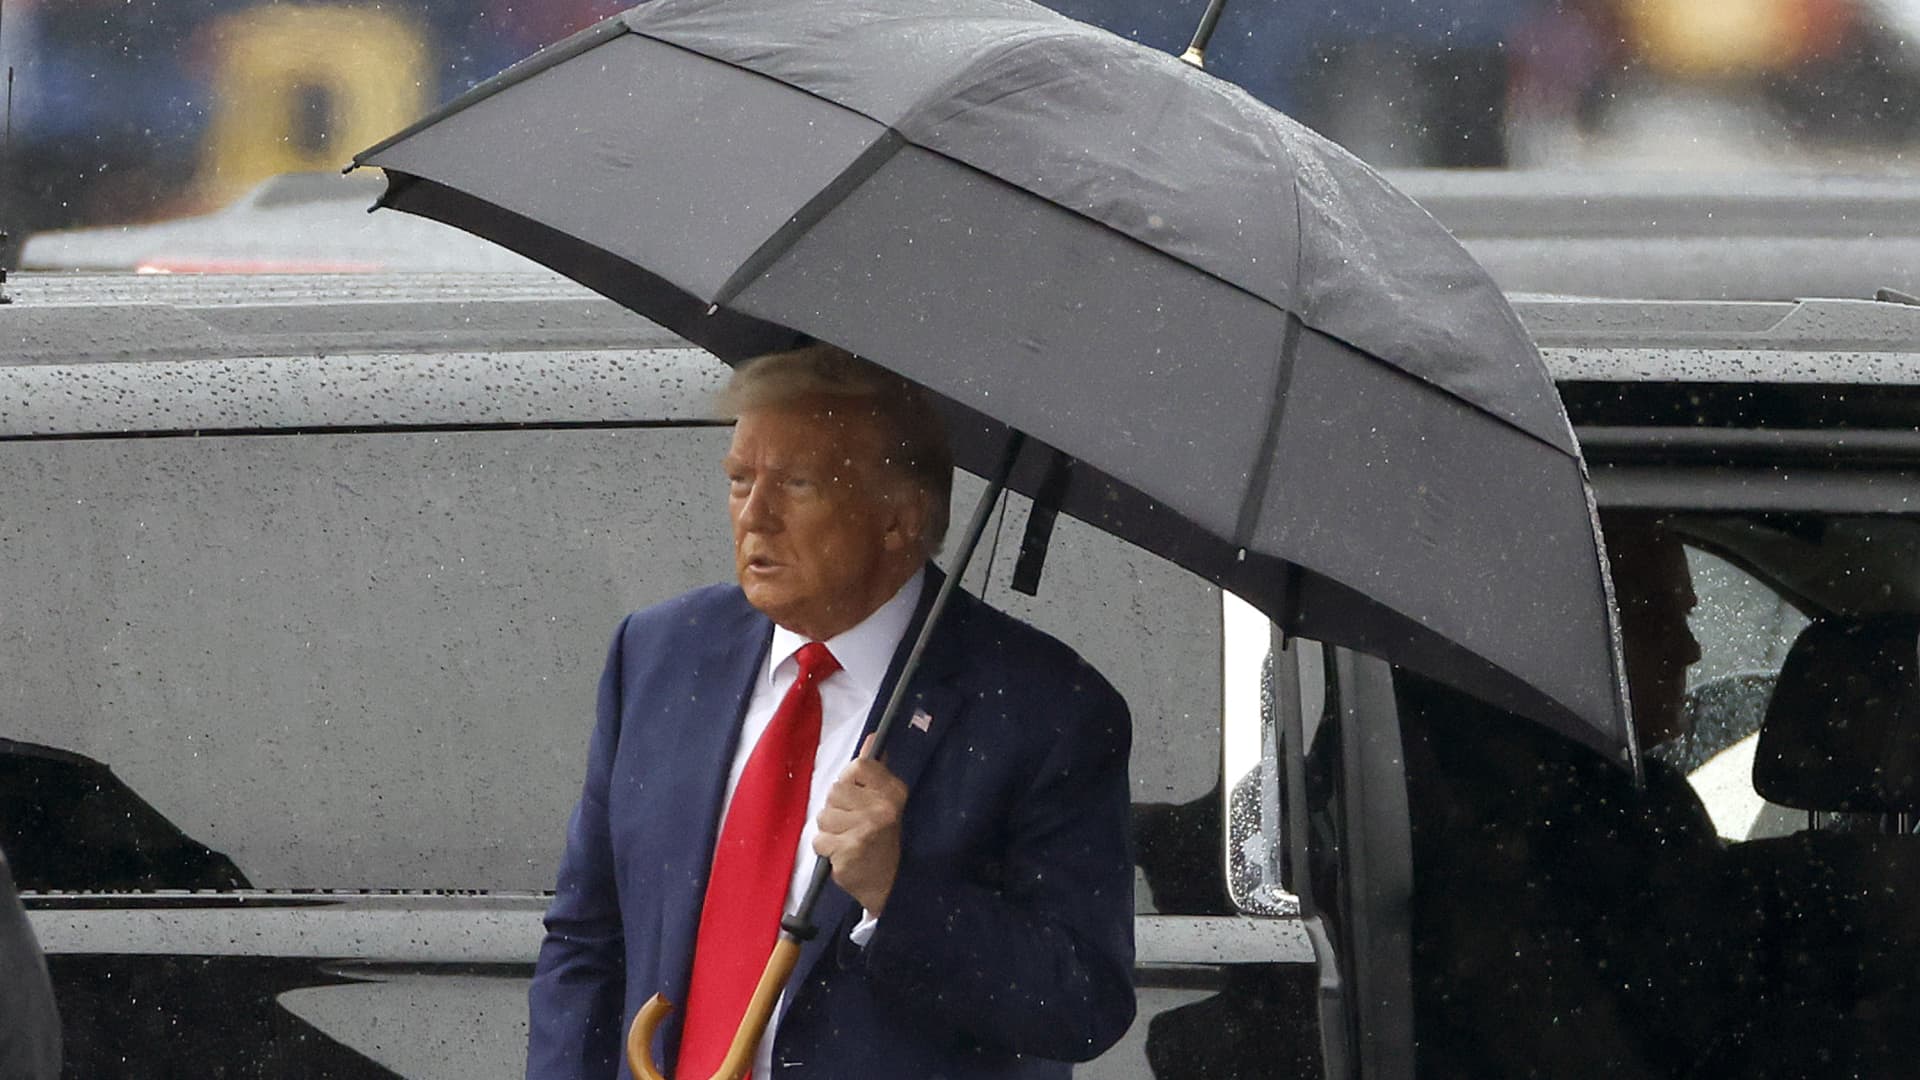 Former U.S. President Donald Trump prepares to board his plane at Reagan National Airport following an arraignment in a Washington, D.C. court on August 3, 2023 in Arlington, Virginia. 